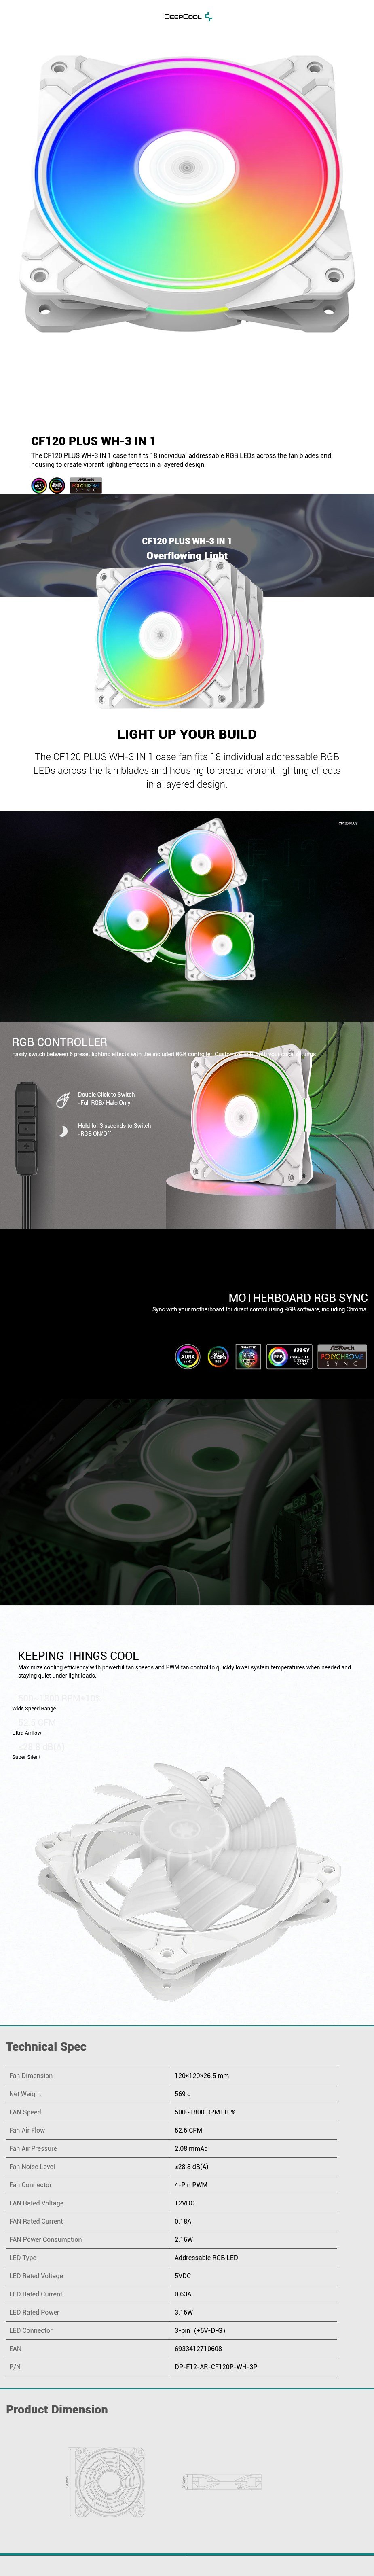 A large marketing image providing additional information about the product DeepCool CF120 PLUS WH 3 in 1 120mm Case Fan Pack - White - Additional alt info not provided